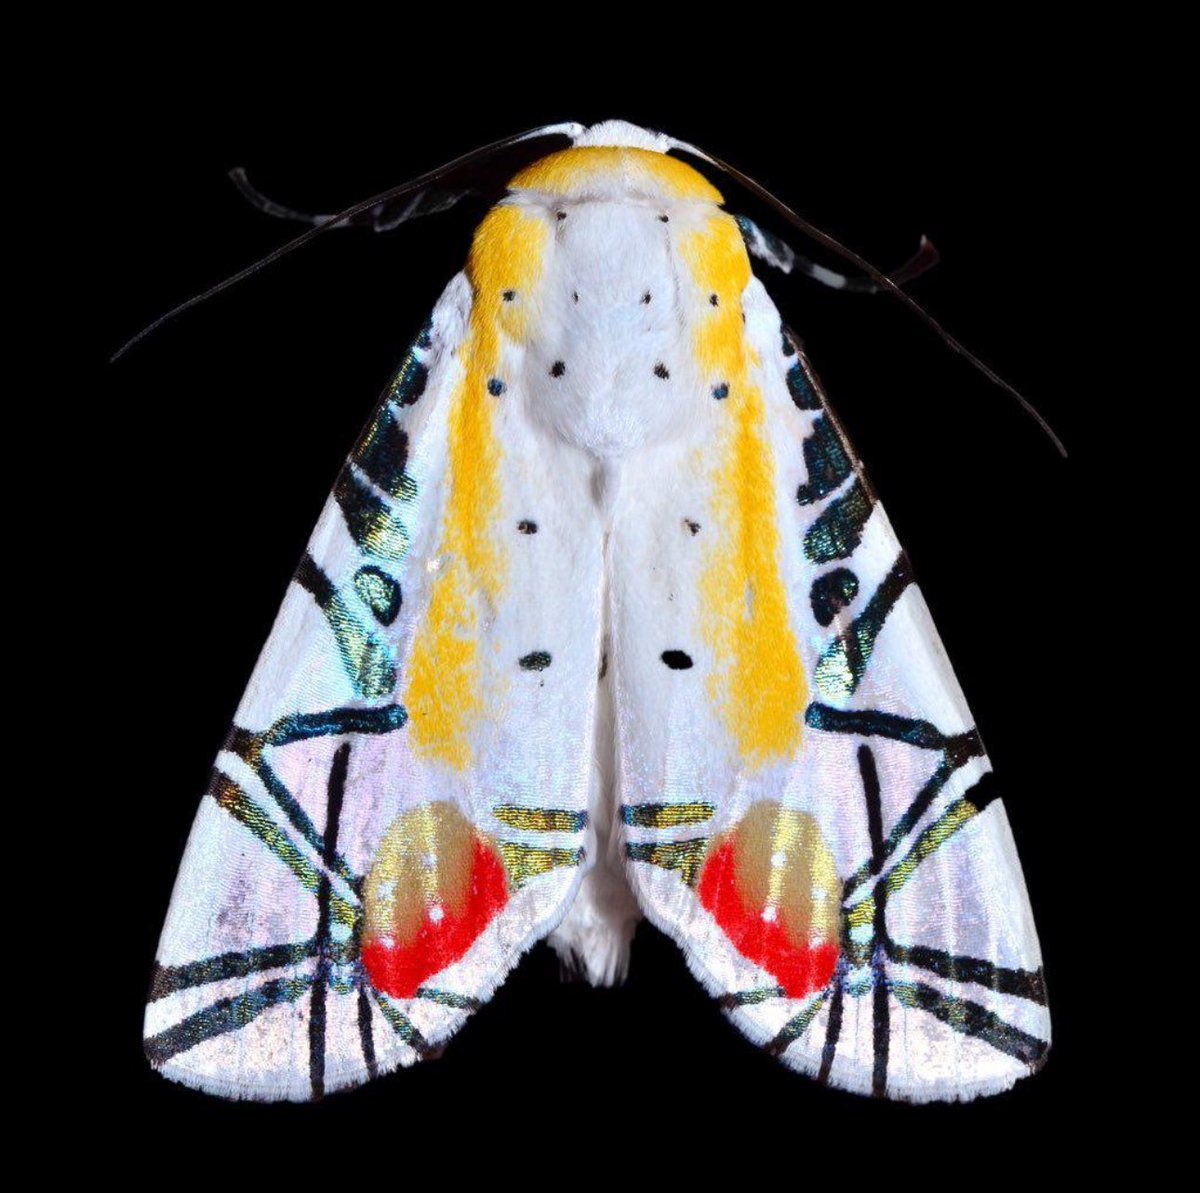 Baorisa hieroglyphica, also known as the Picasso moth.